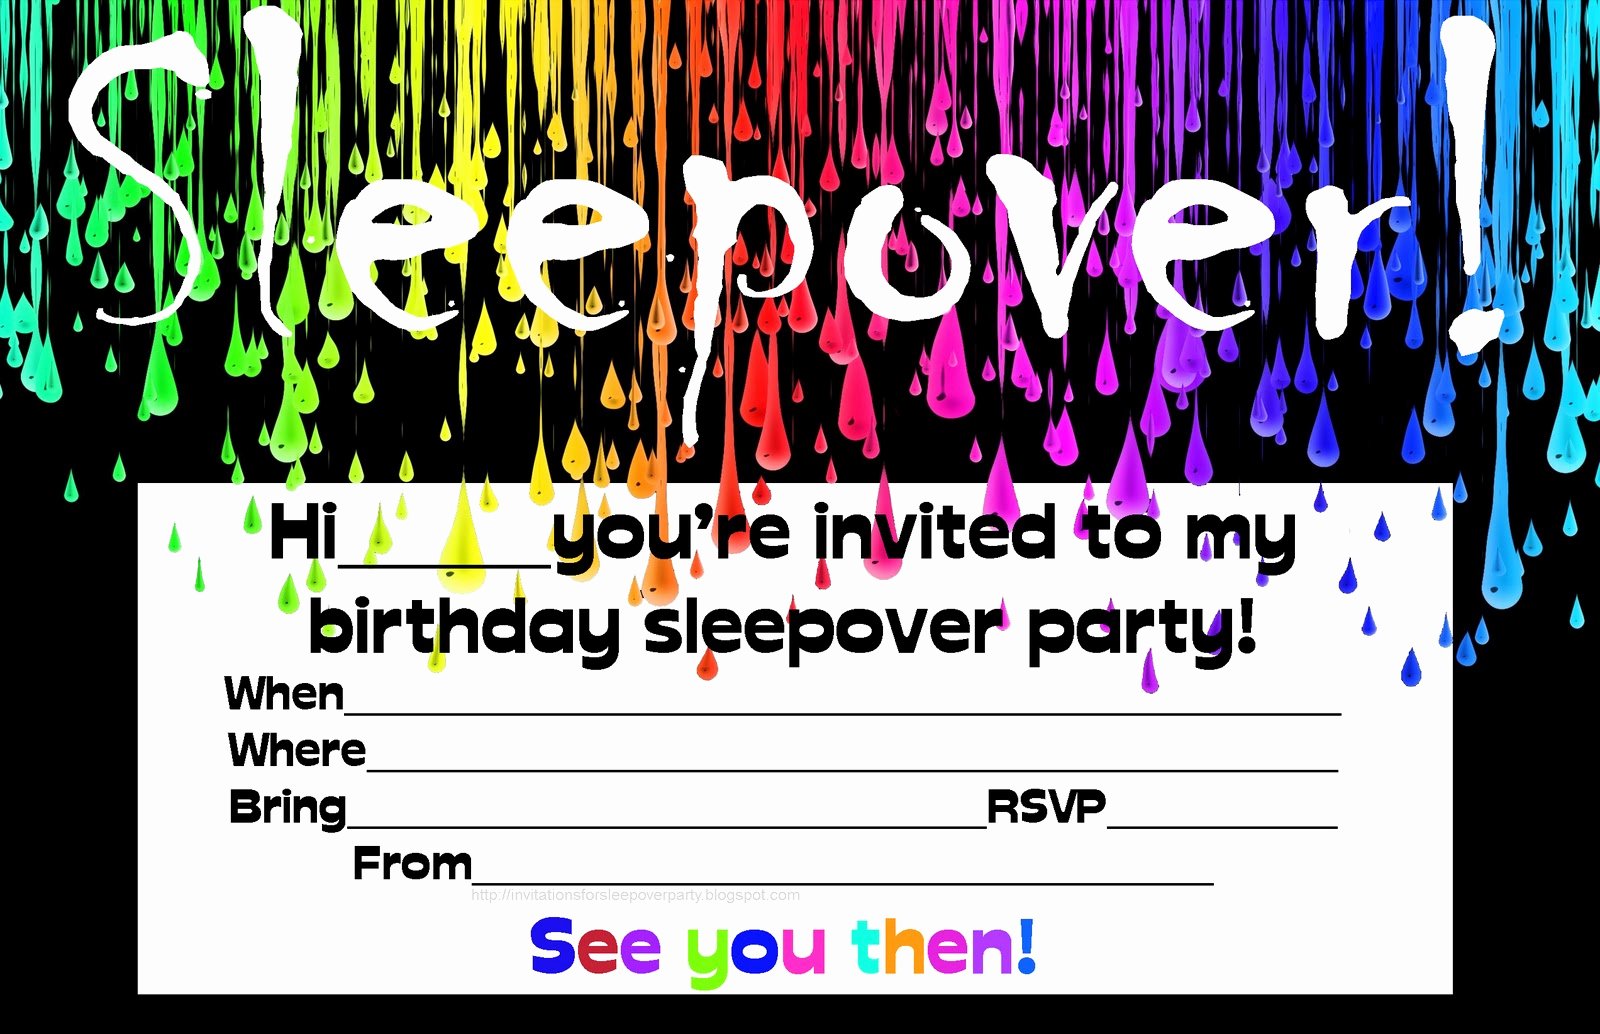 Printable Birthday Party Invitations Lovely 13th Birthday Party Invitation Ideas – Free Printable